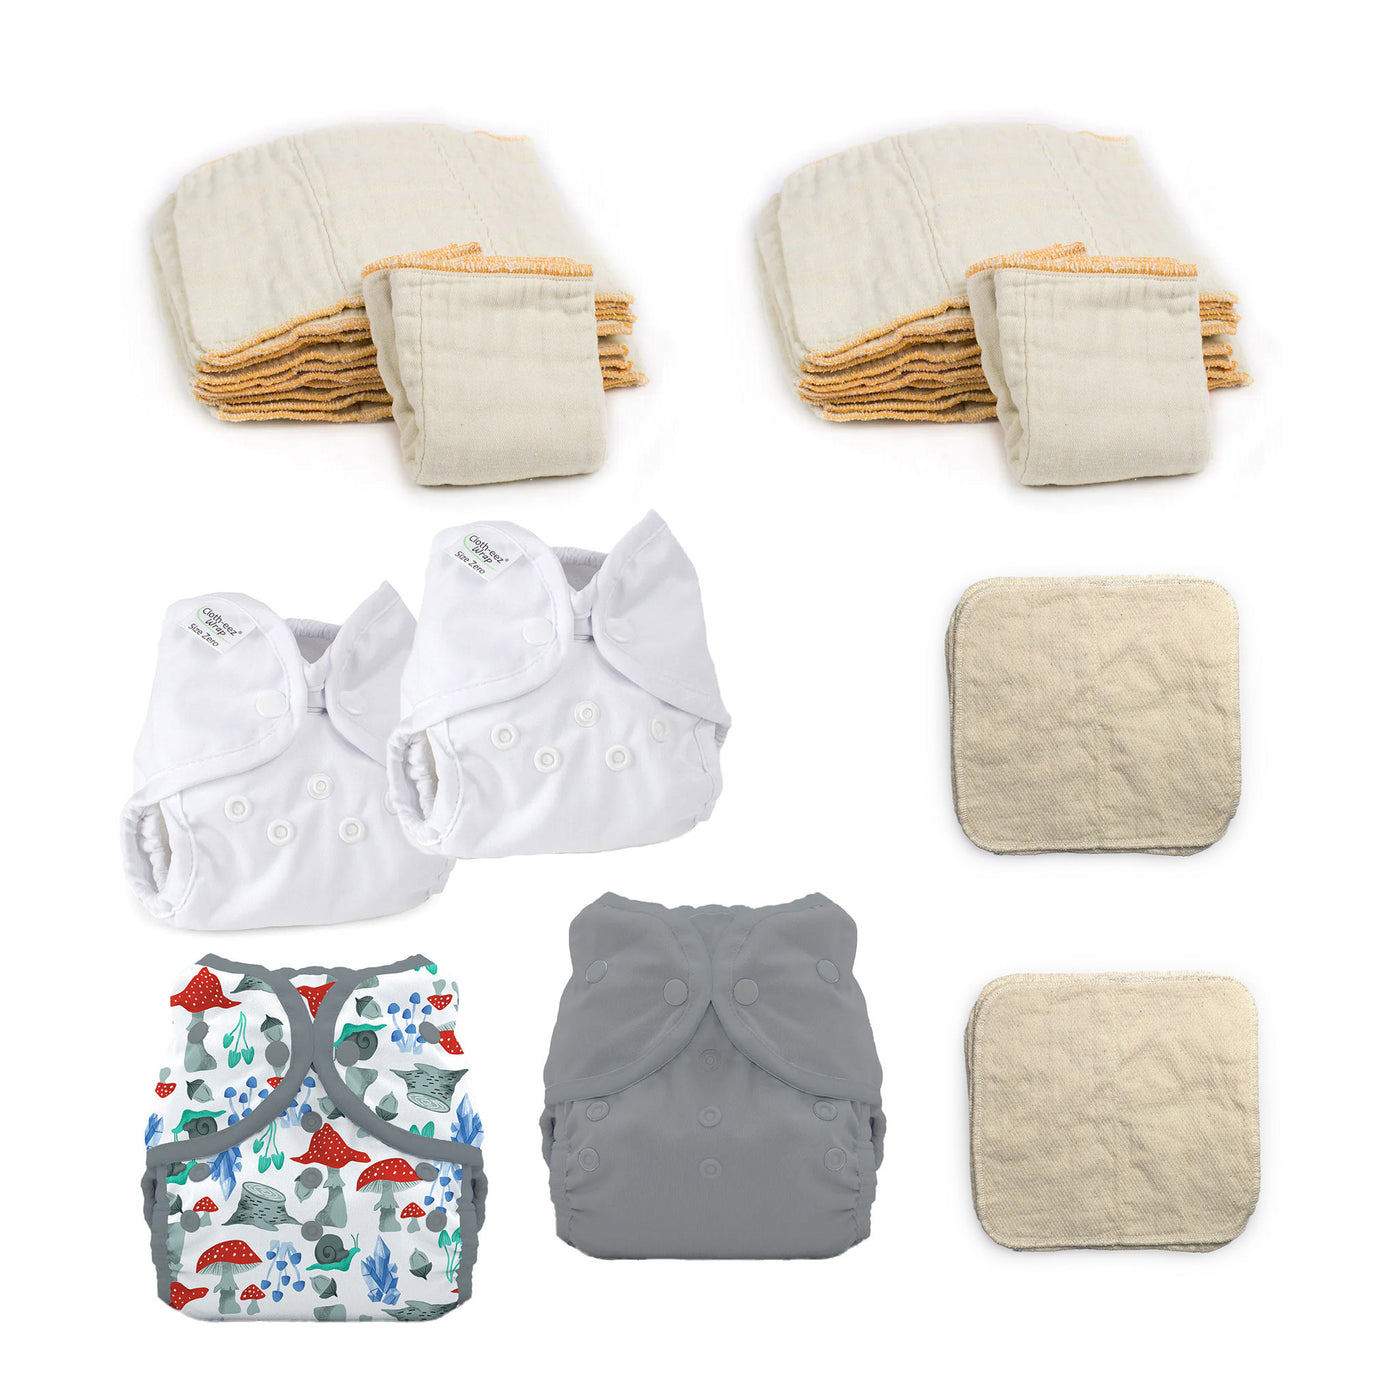 hello baby cloth diaper kit with organic diapers